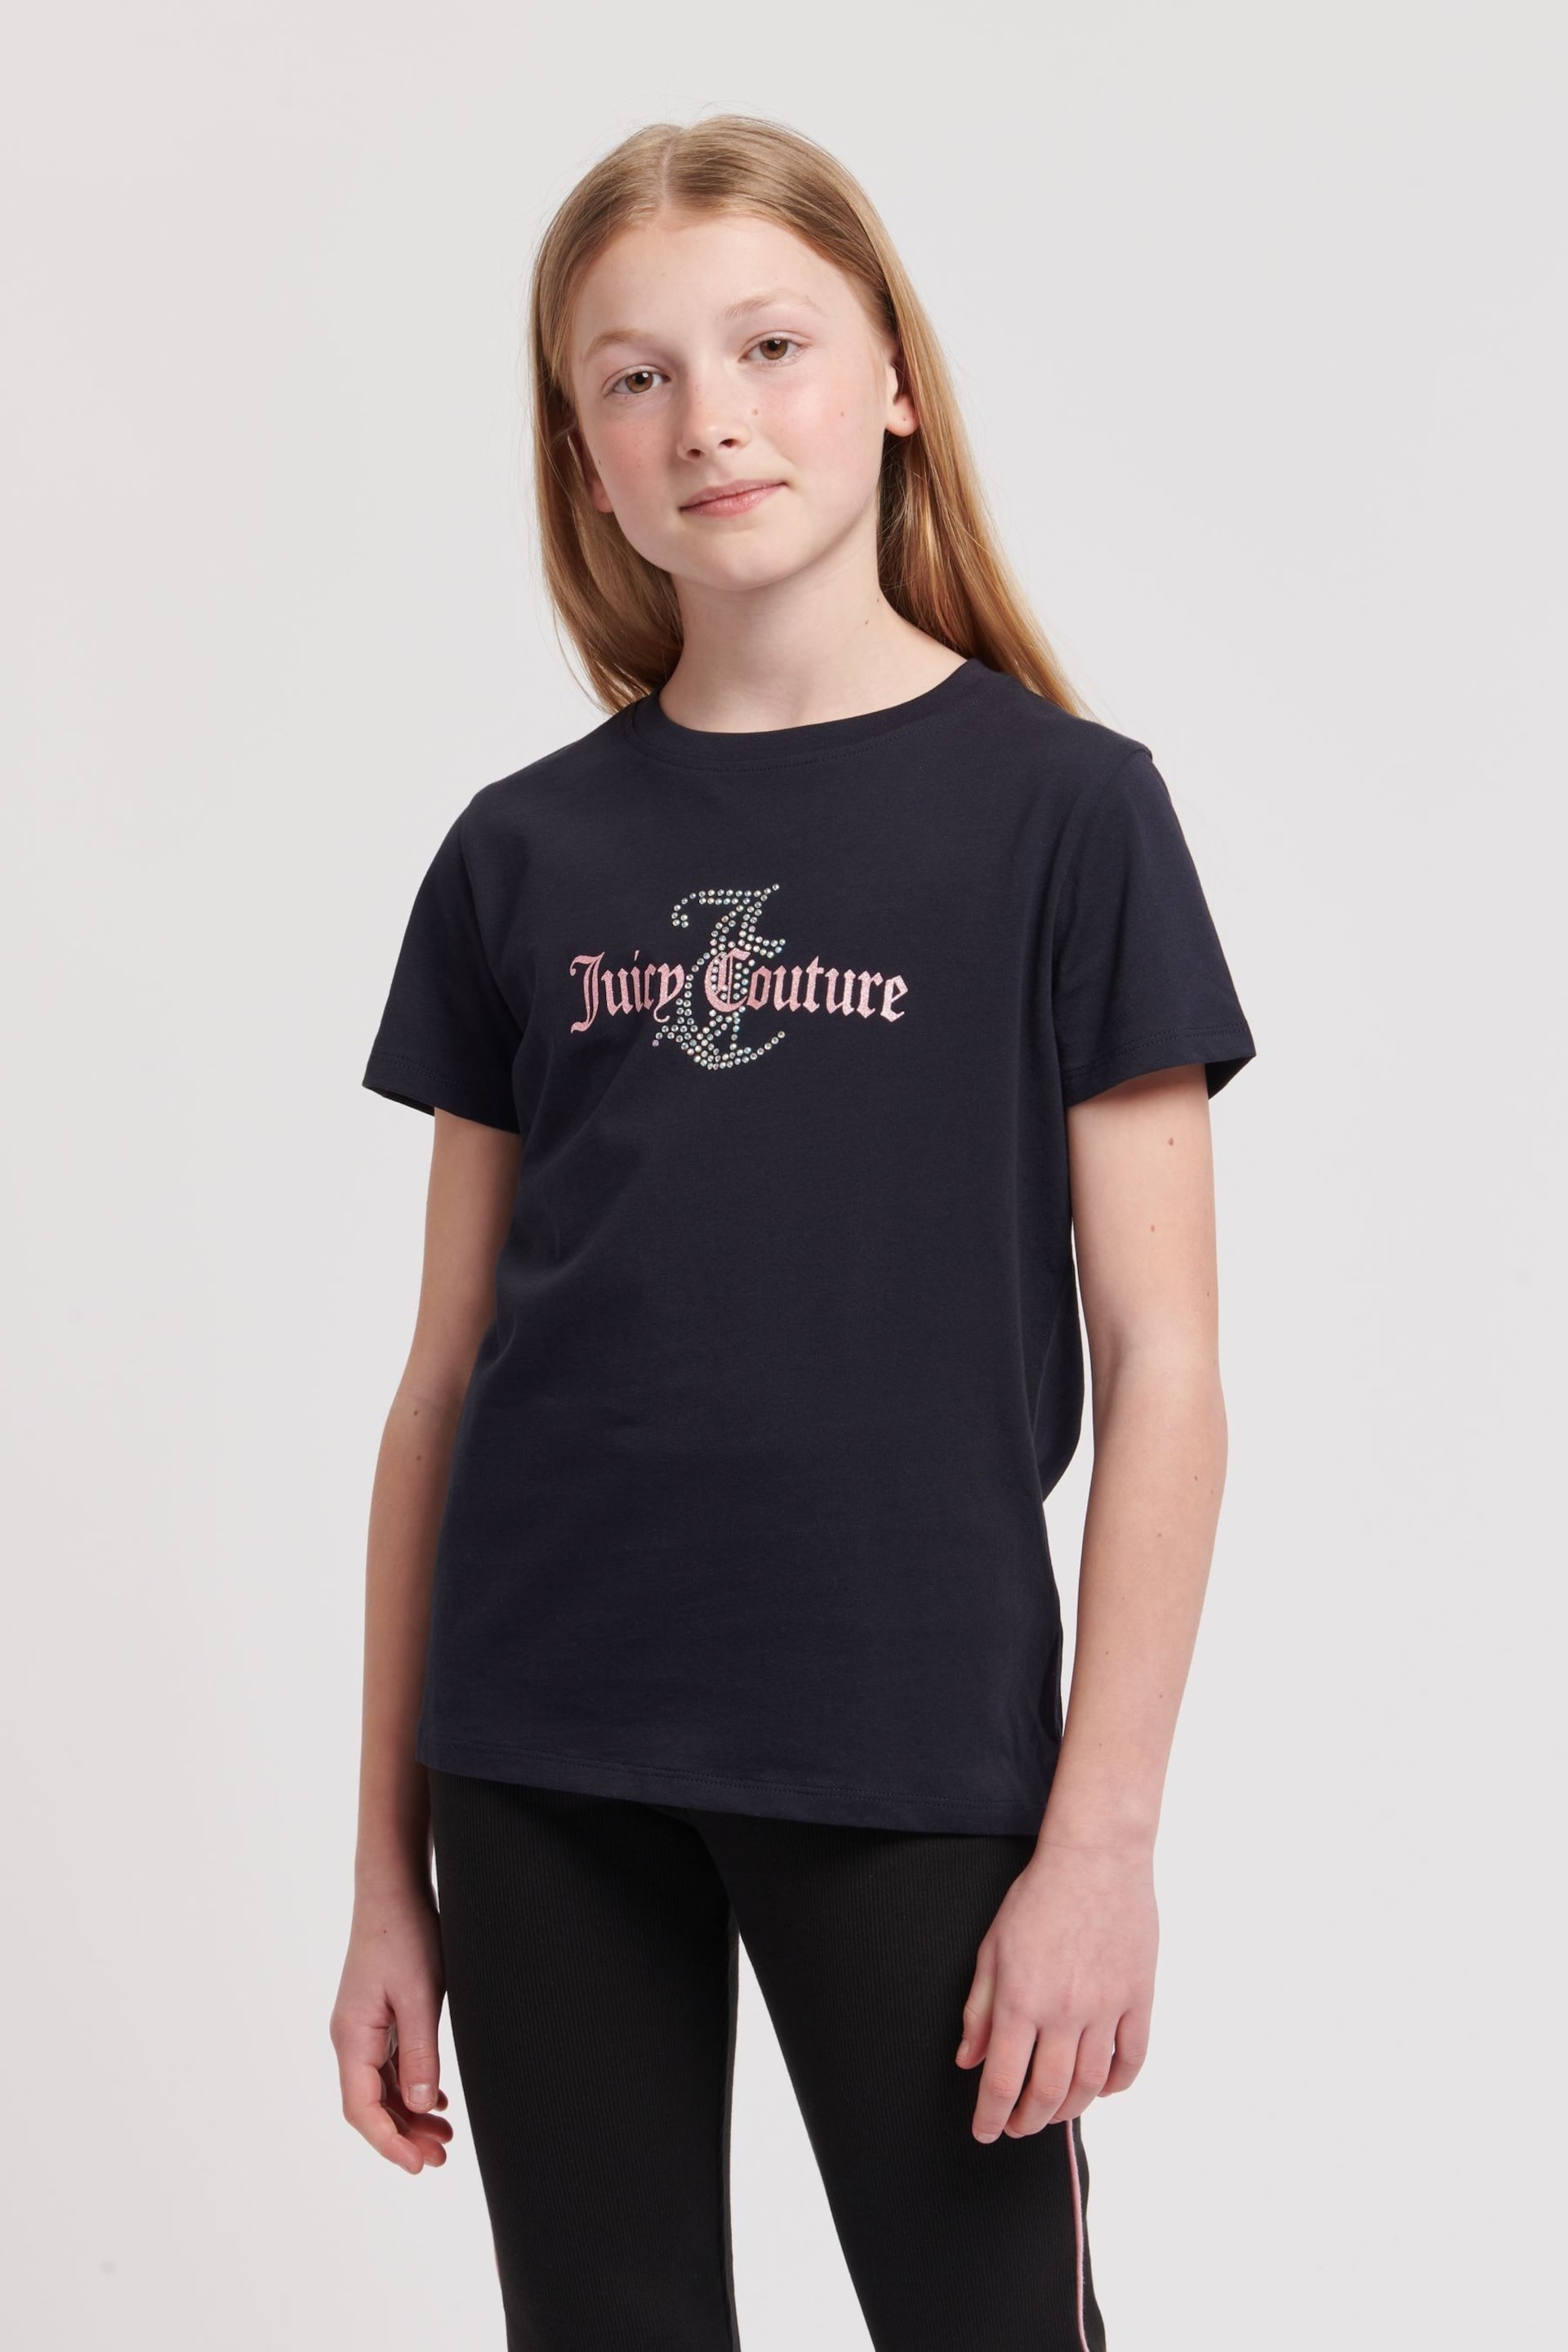 Juicy Couture Classic Fit Girls Diamante T-Shirt - Image 1 of 7